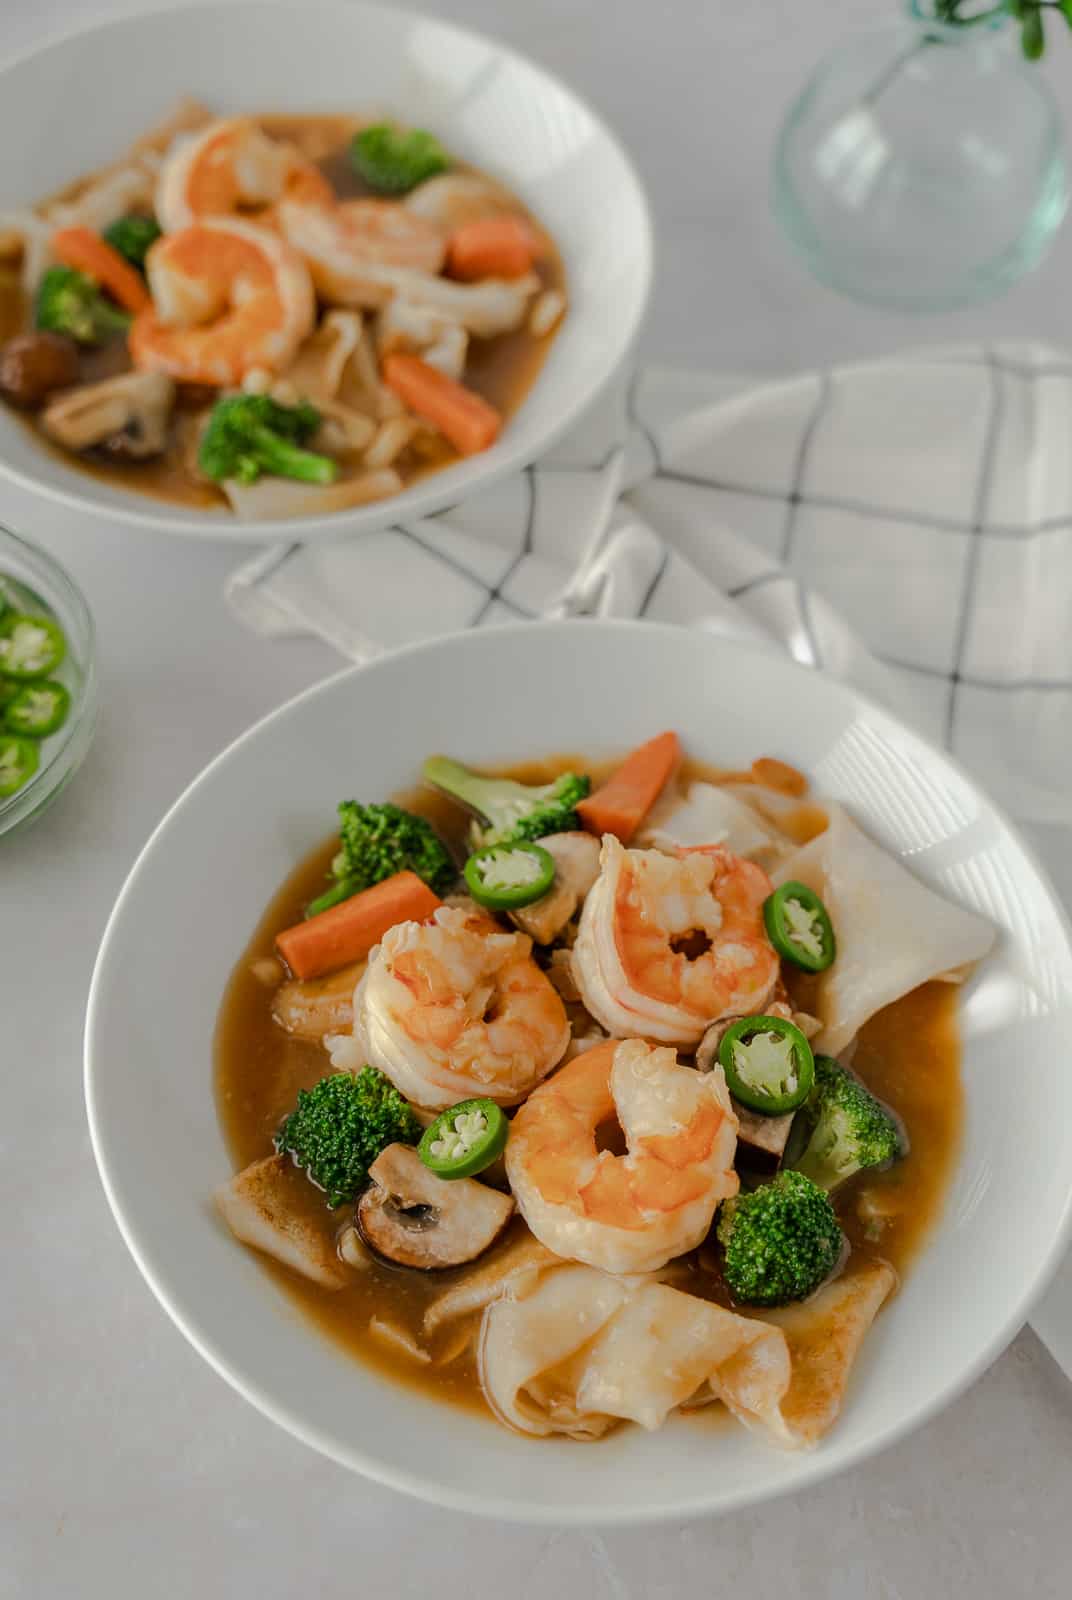 Two bowls of rice noodles with gravy and shrimp on top.